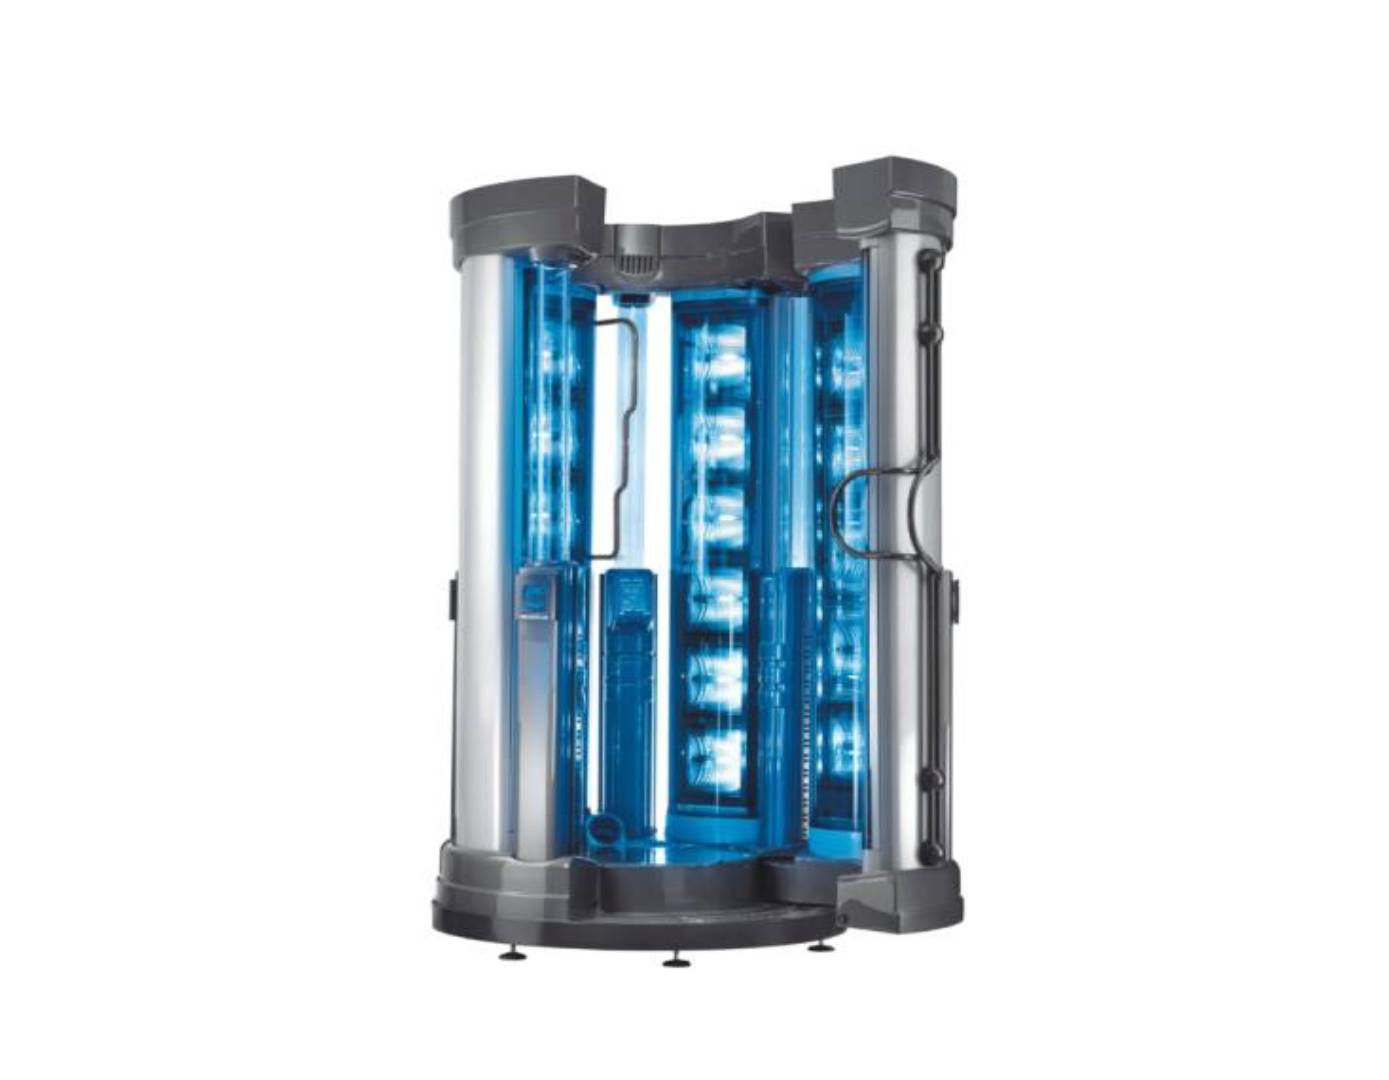 A blue light is on in the middle of a cylindrical structure.